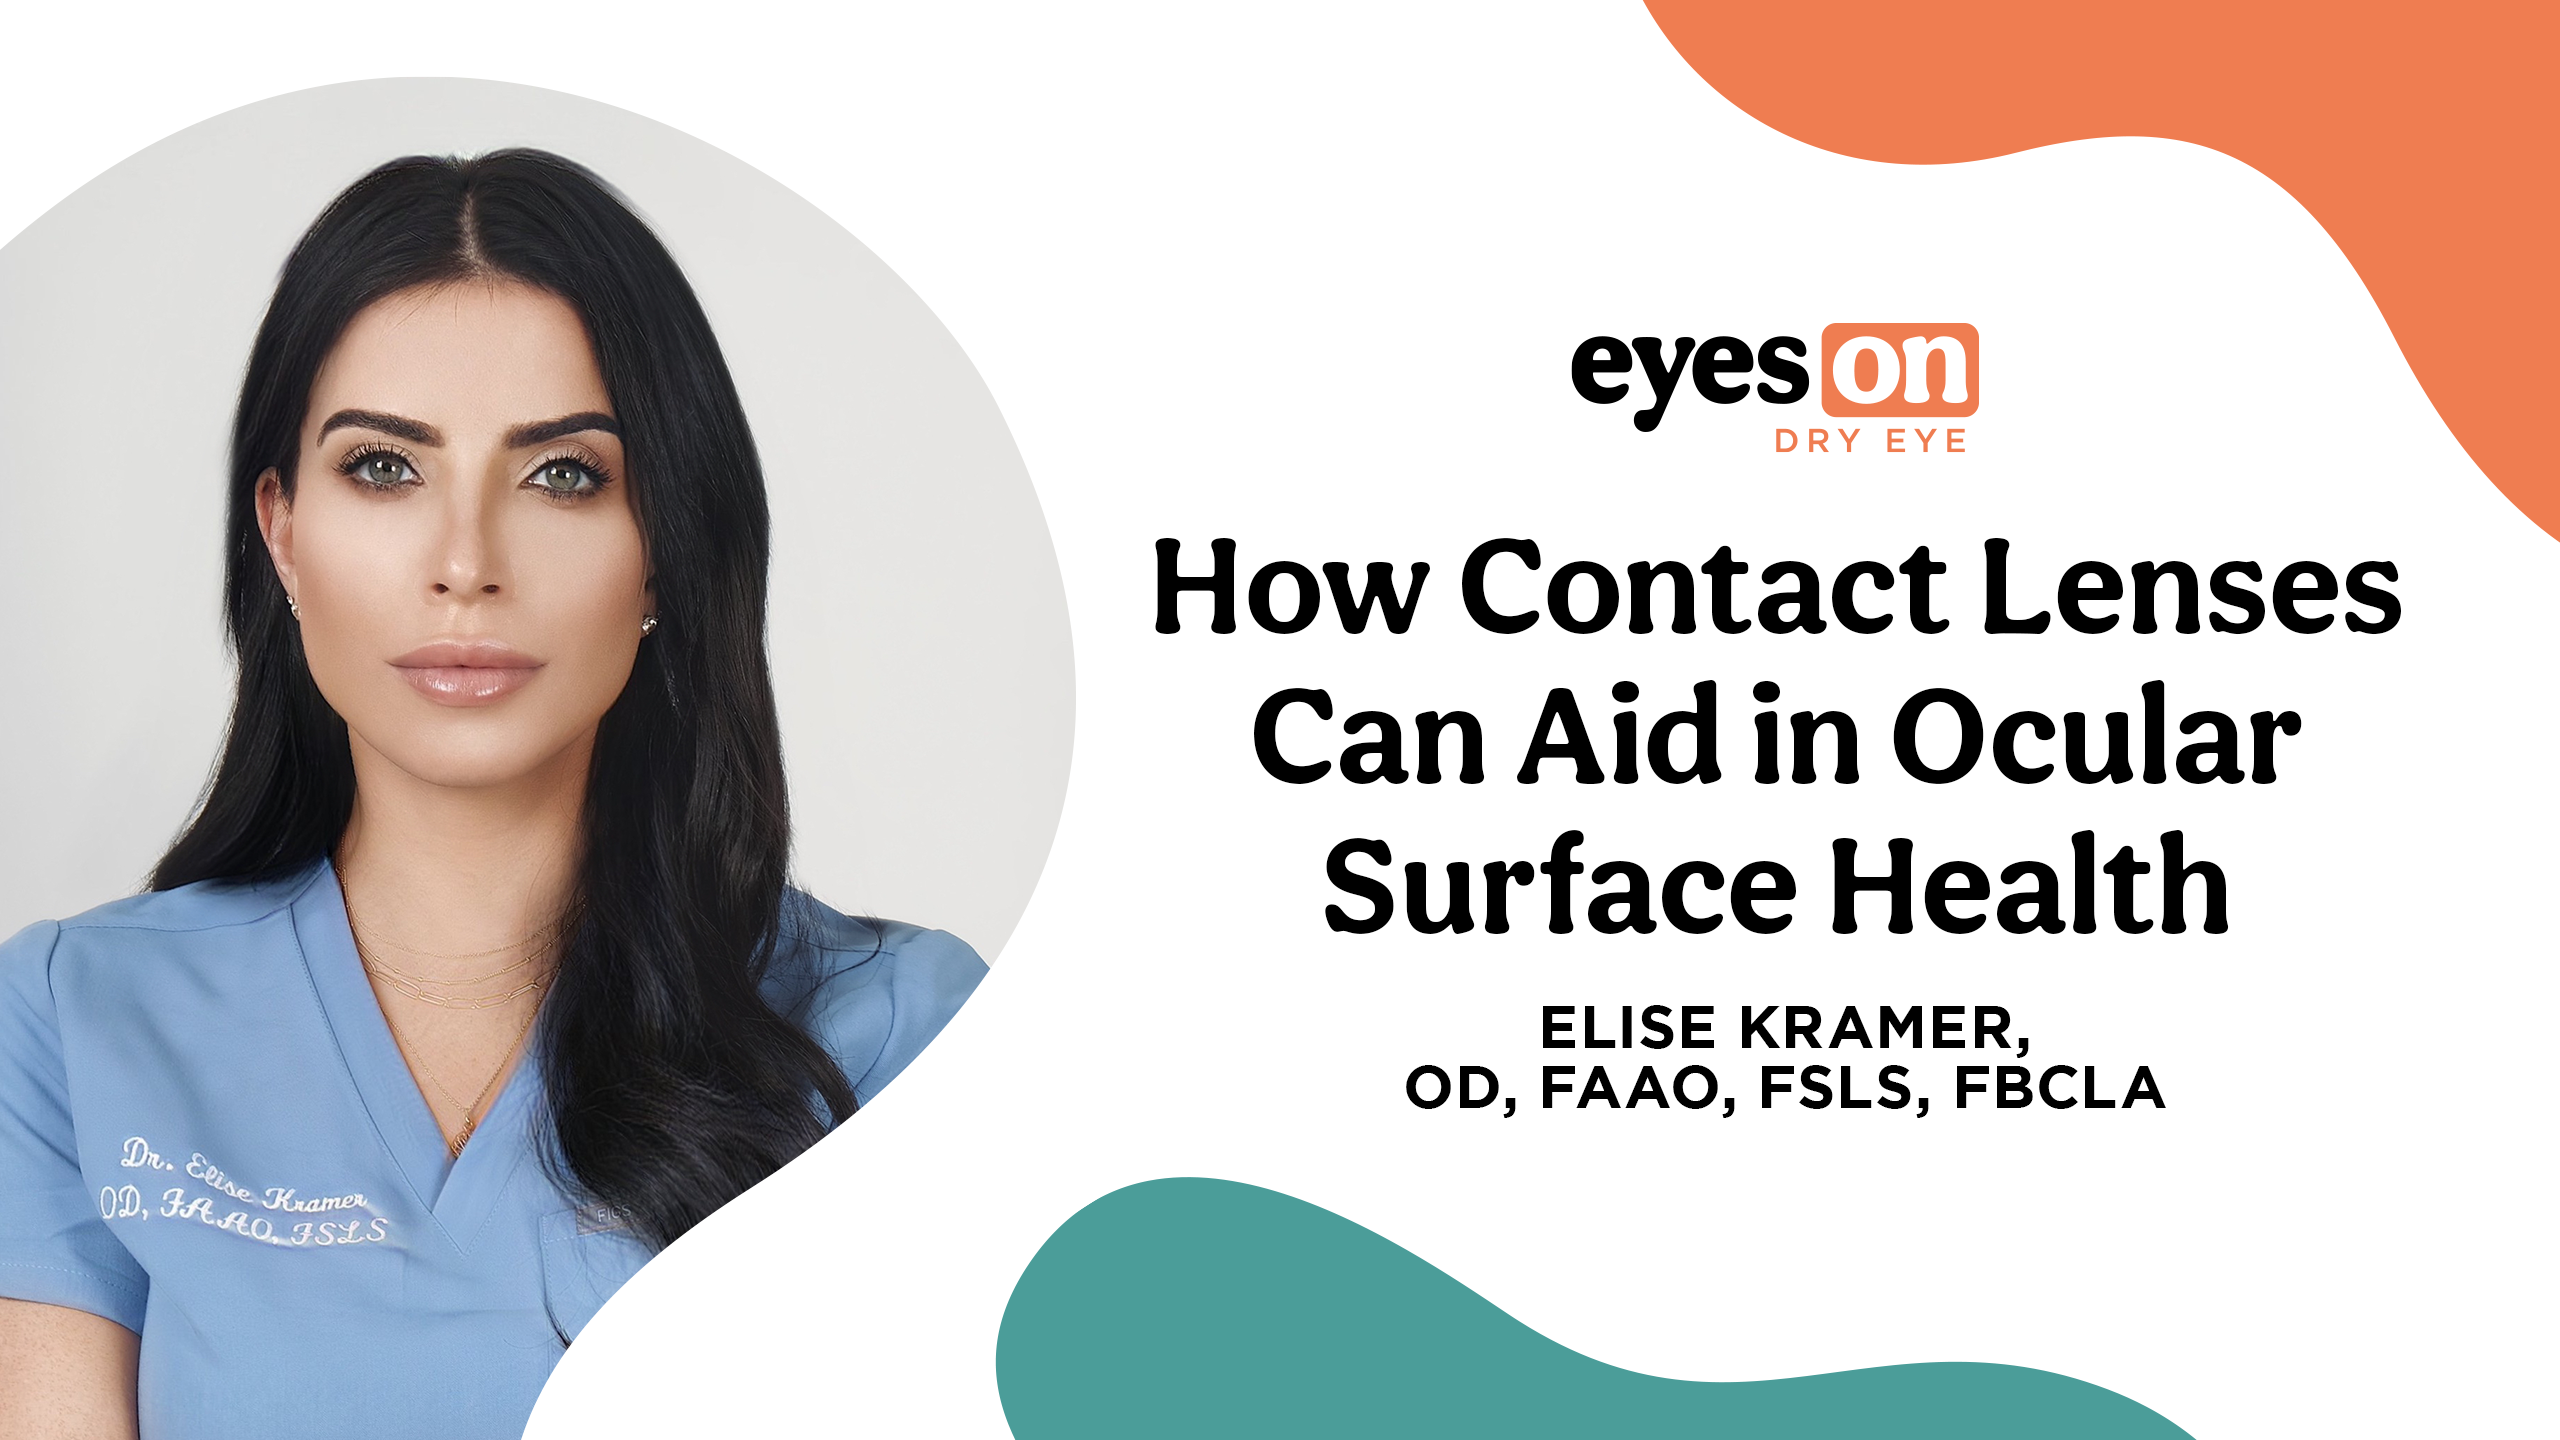 How Contact Lenses Can Aid in Ocular Surface Health